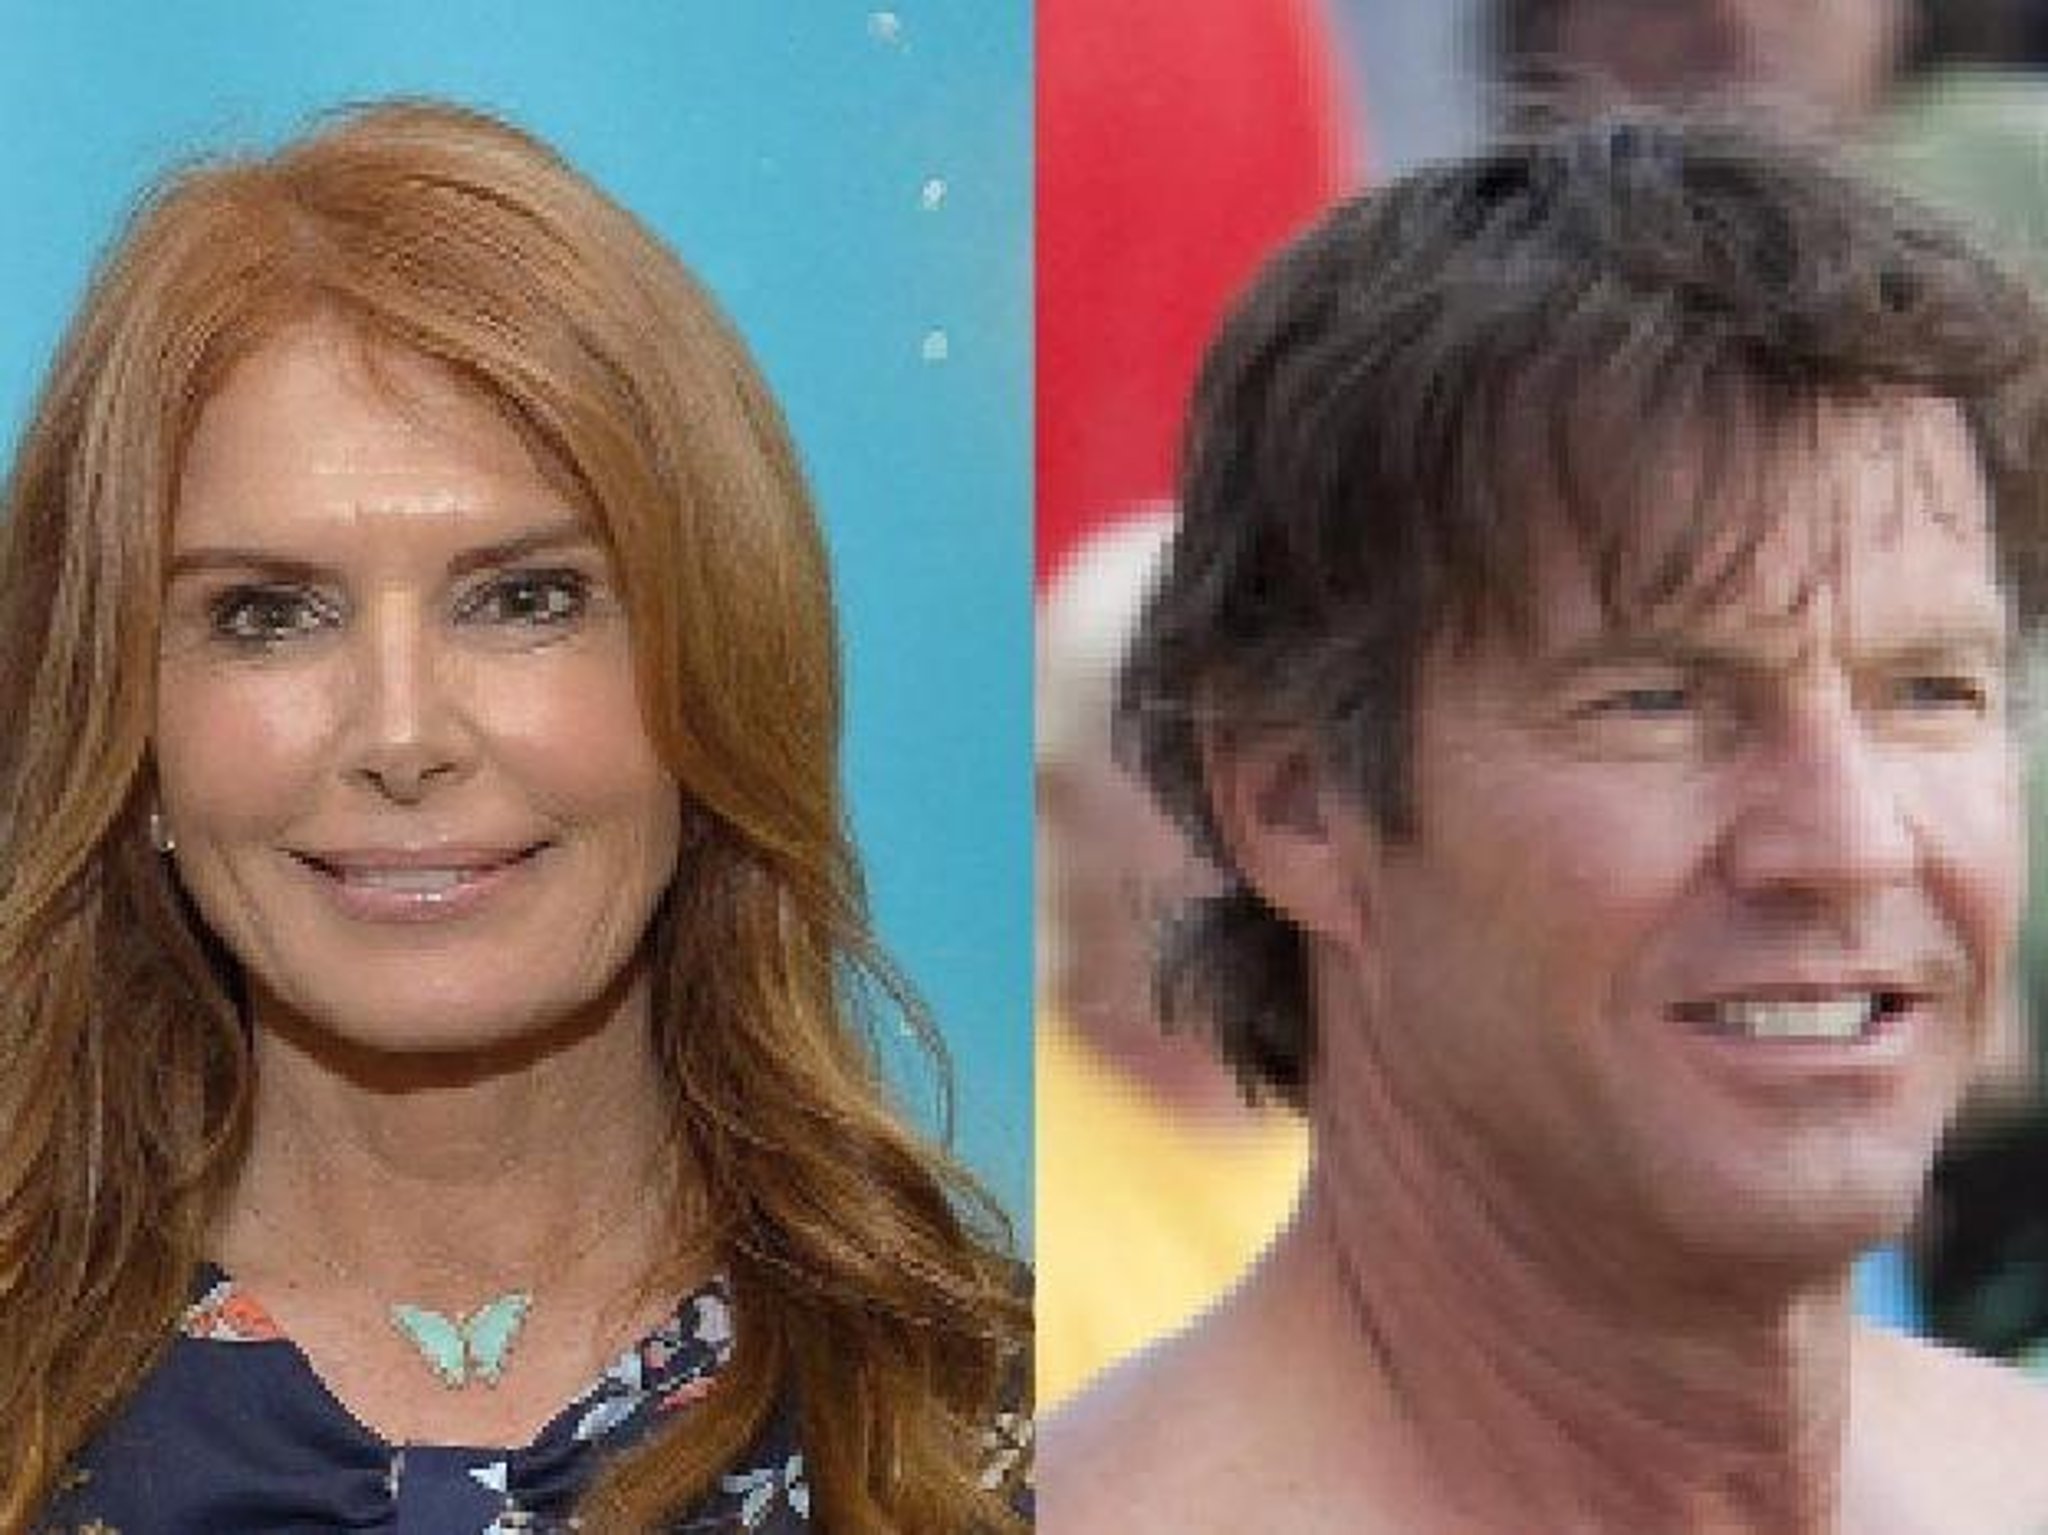 Pictures of roma downey